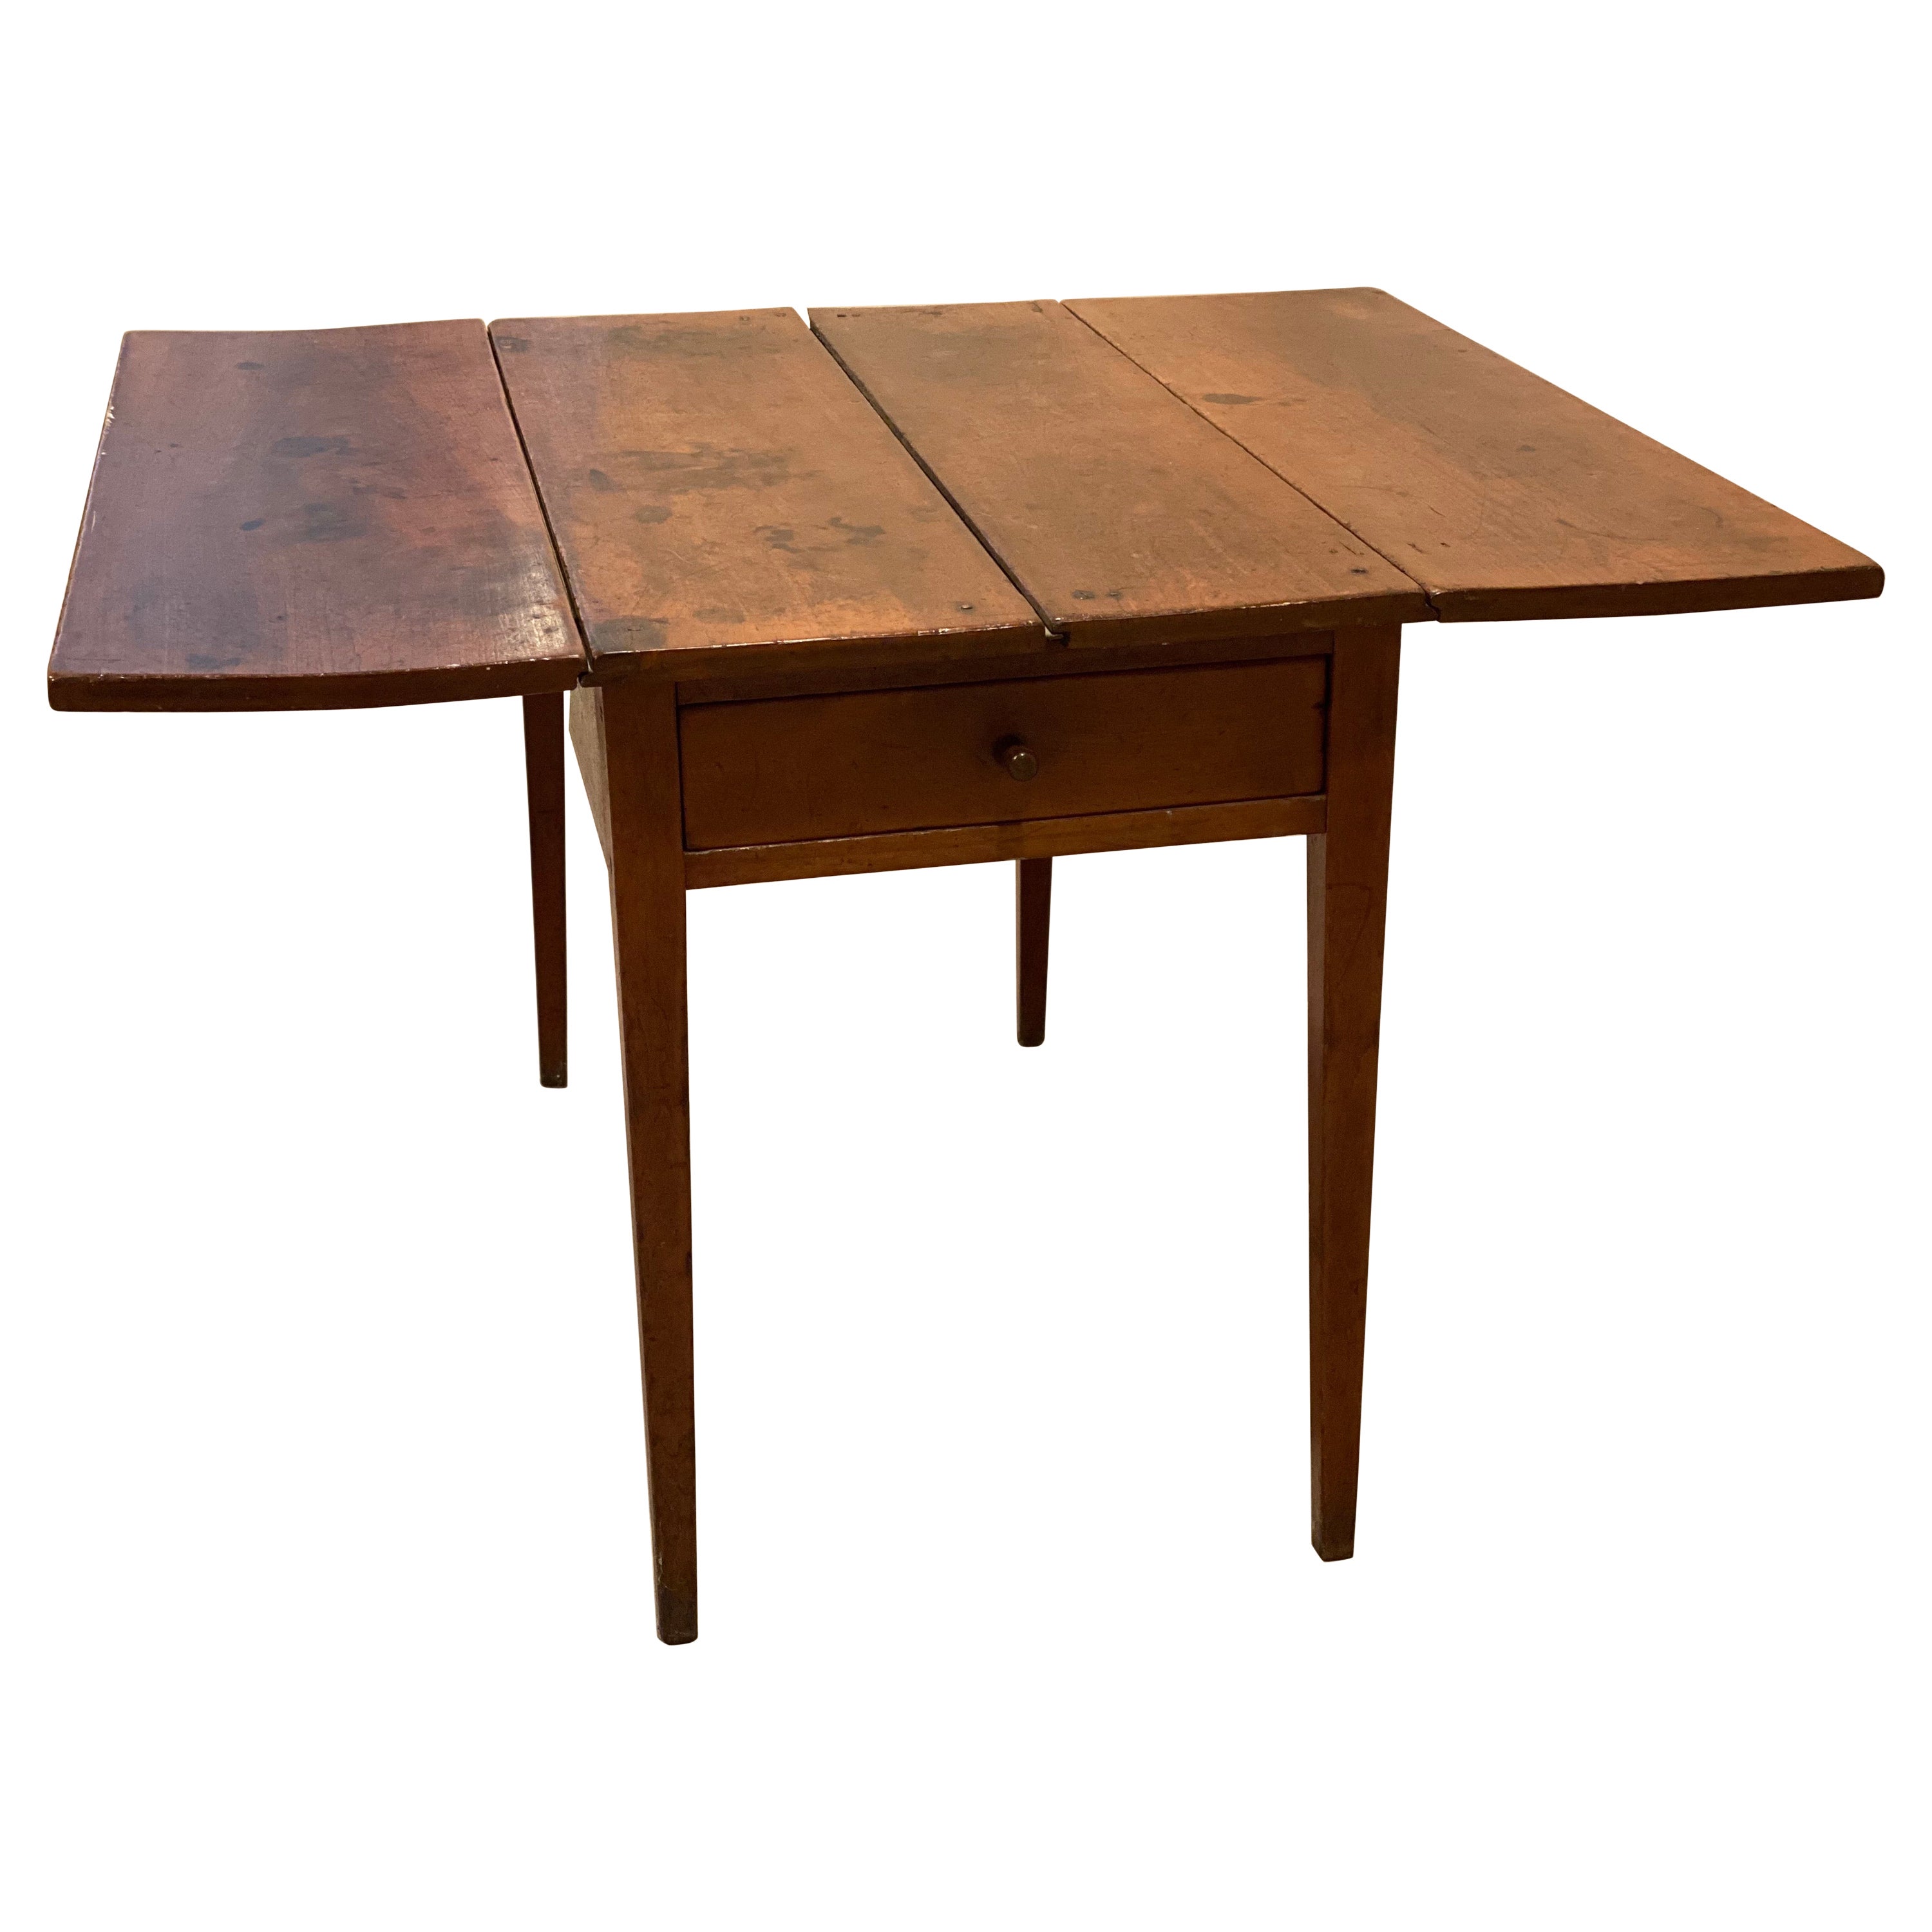 19th Century American Mahogany Drop-Leaf Table For Sale